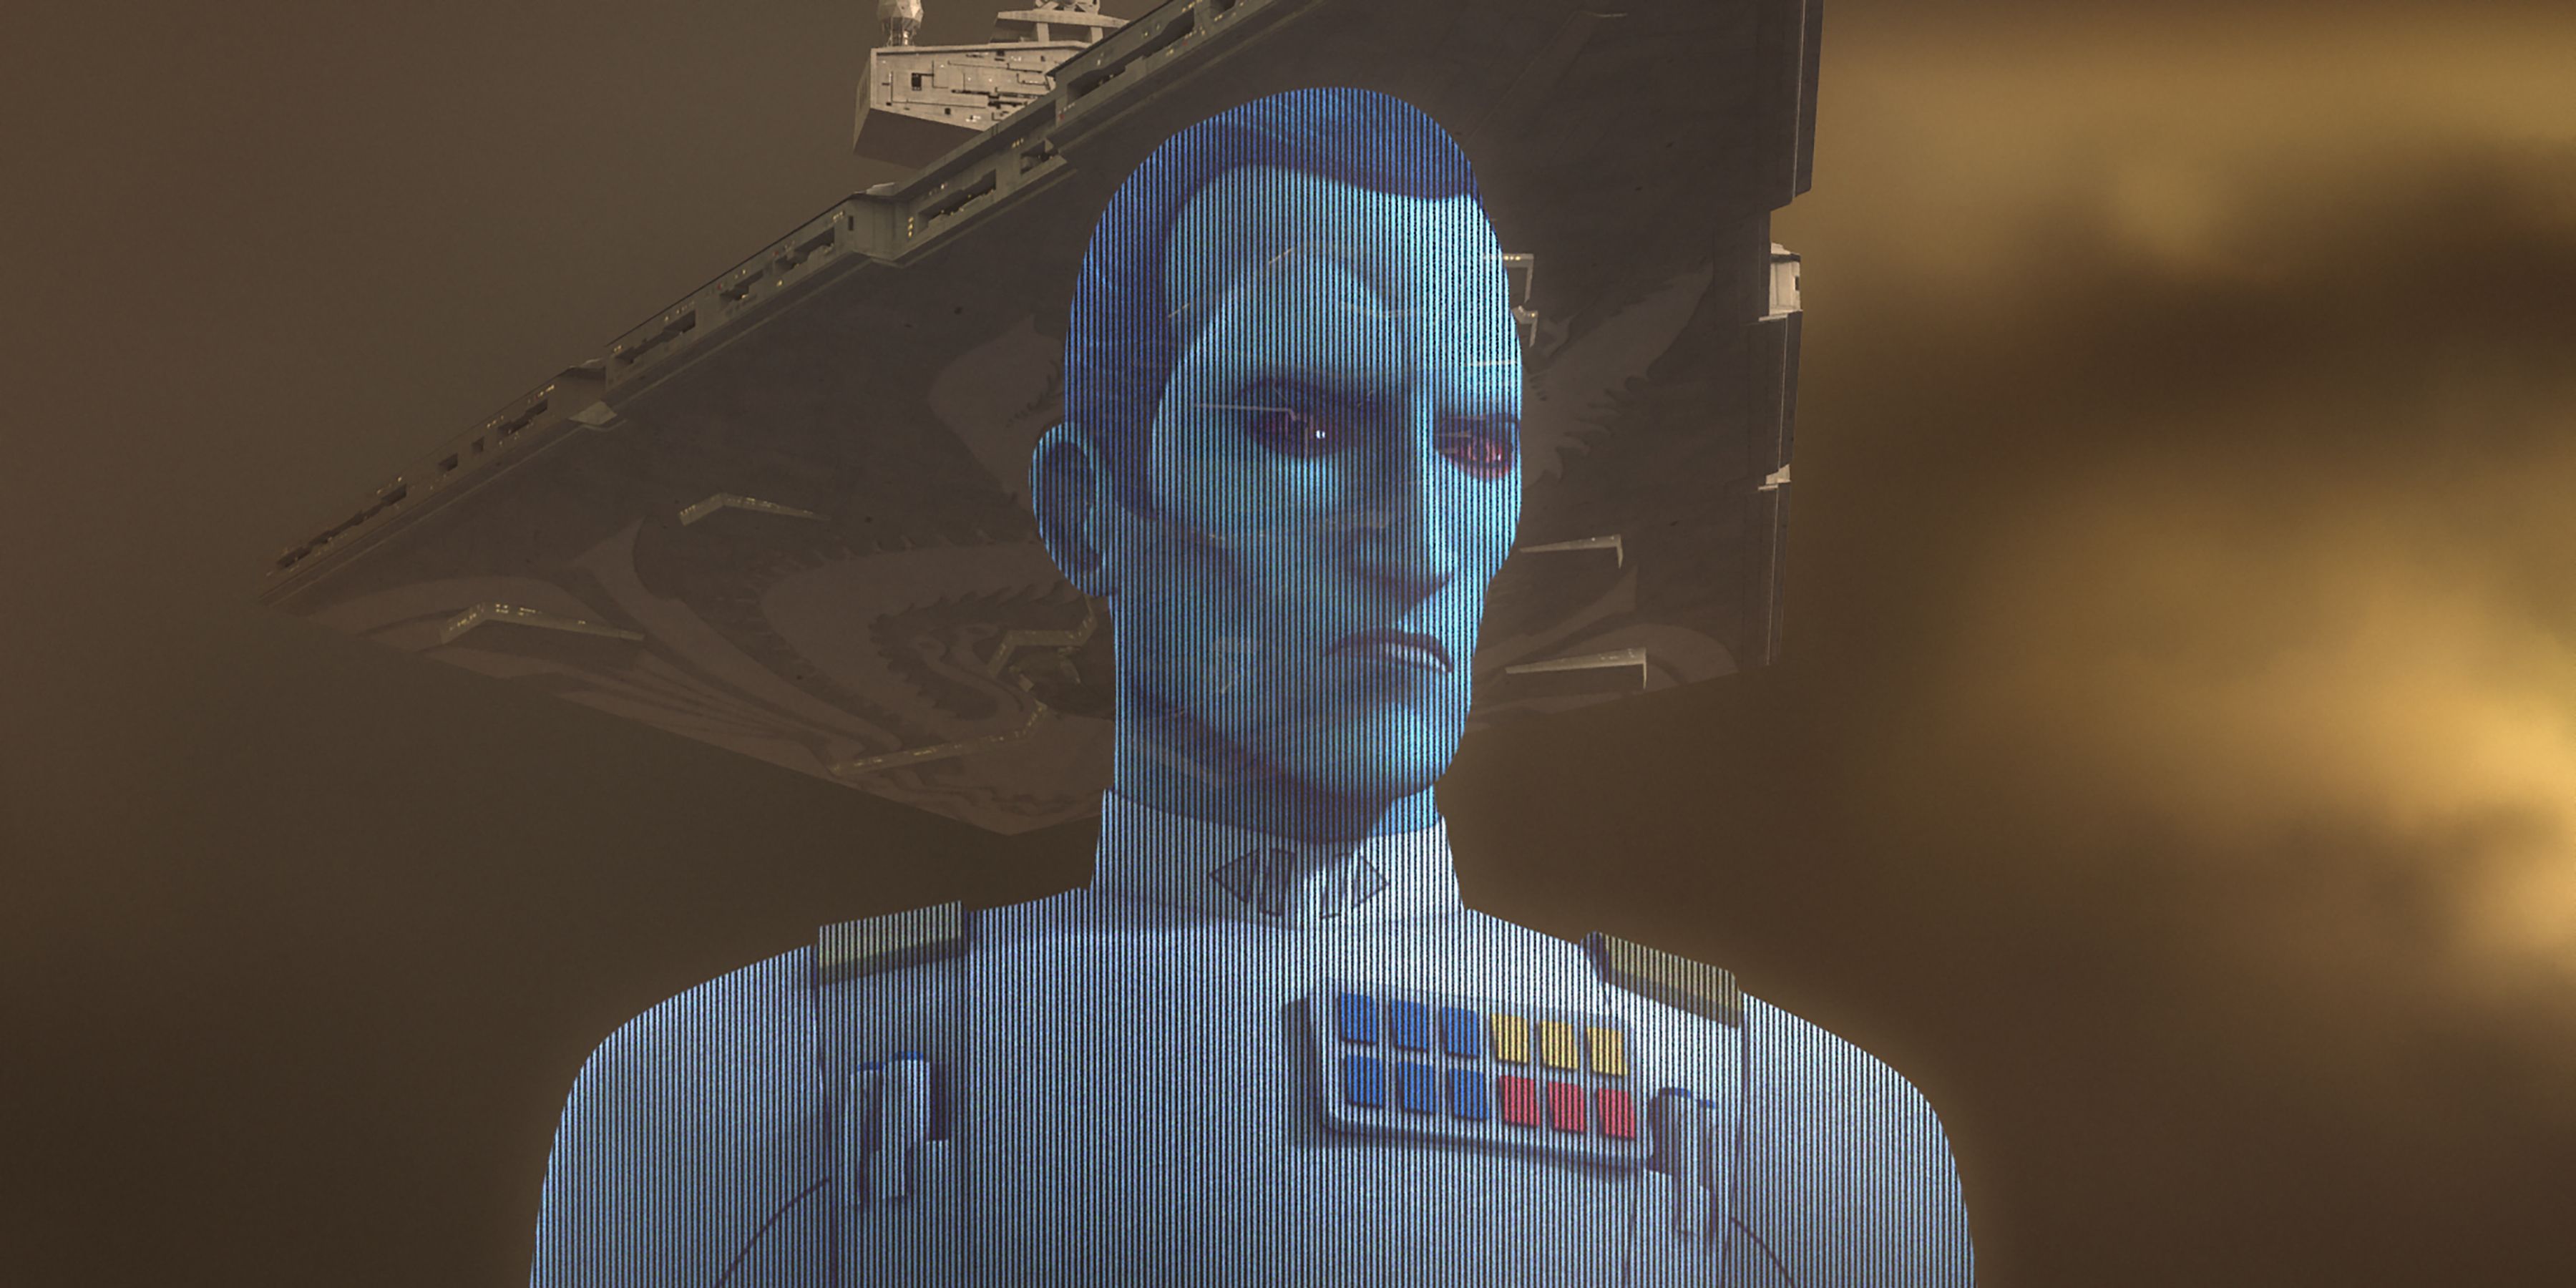 to defeat an enemy thrawn